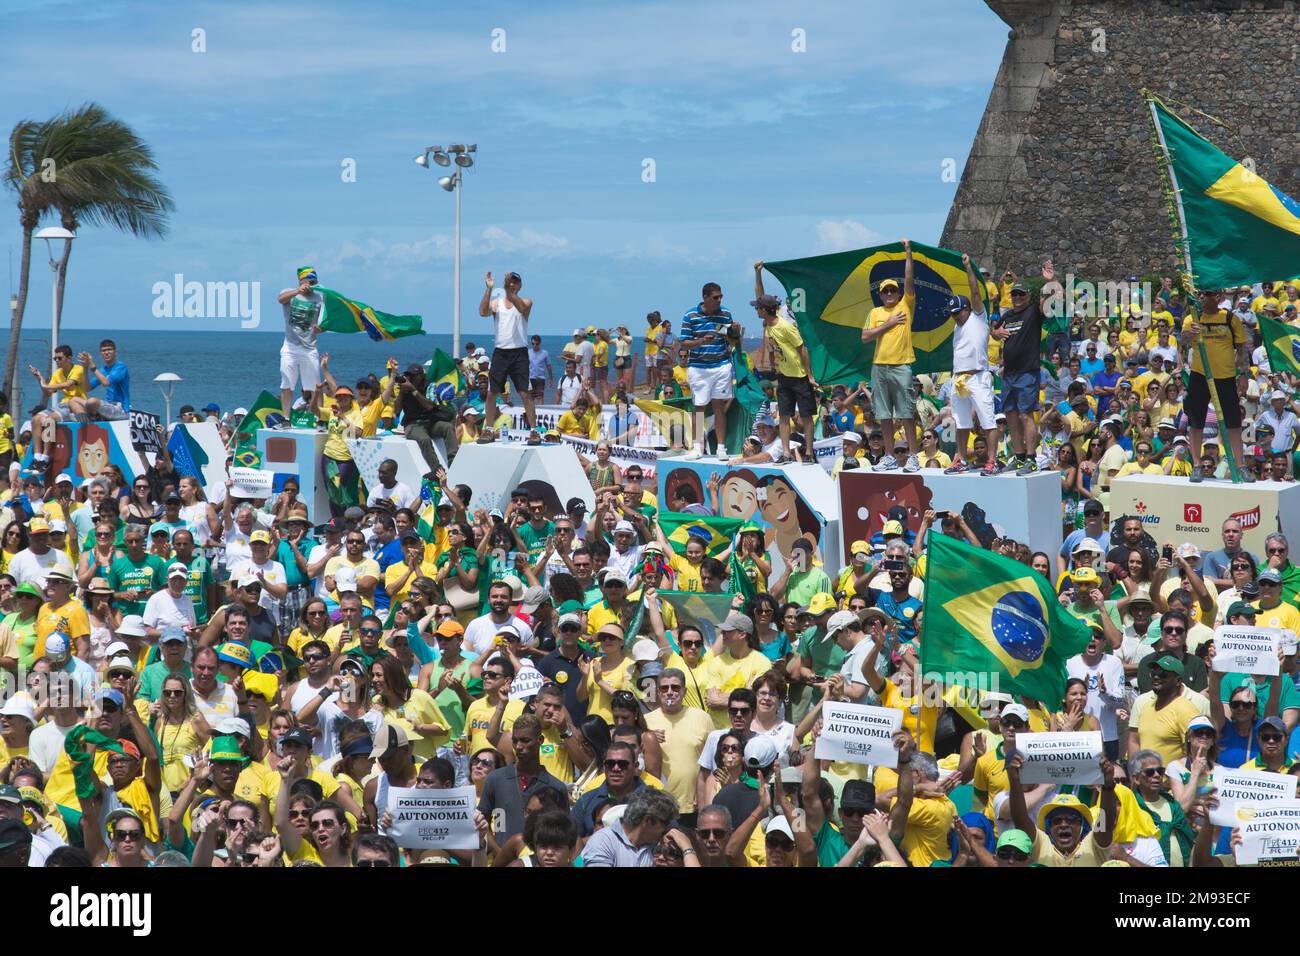 Salvador, Bahia, Brazil - March 13, 2016: Protesters with Brazilian flags call for the impeachment of Dilma Ruosseff. Salvador, Brazil Stock Photo